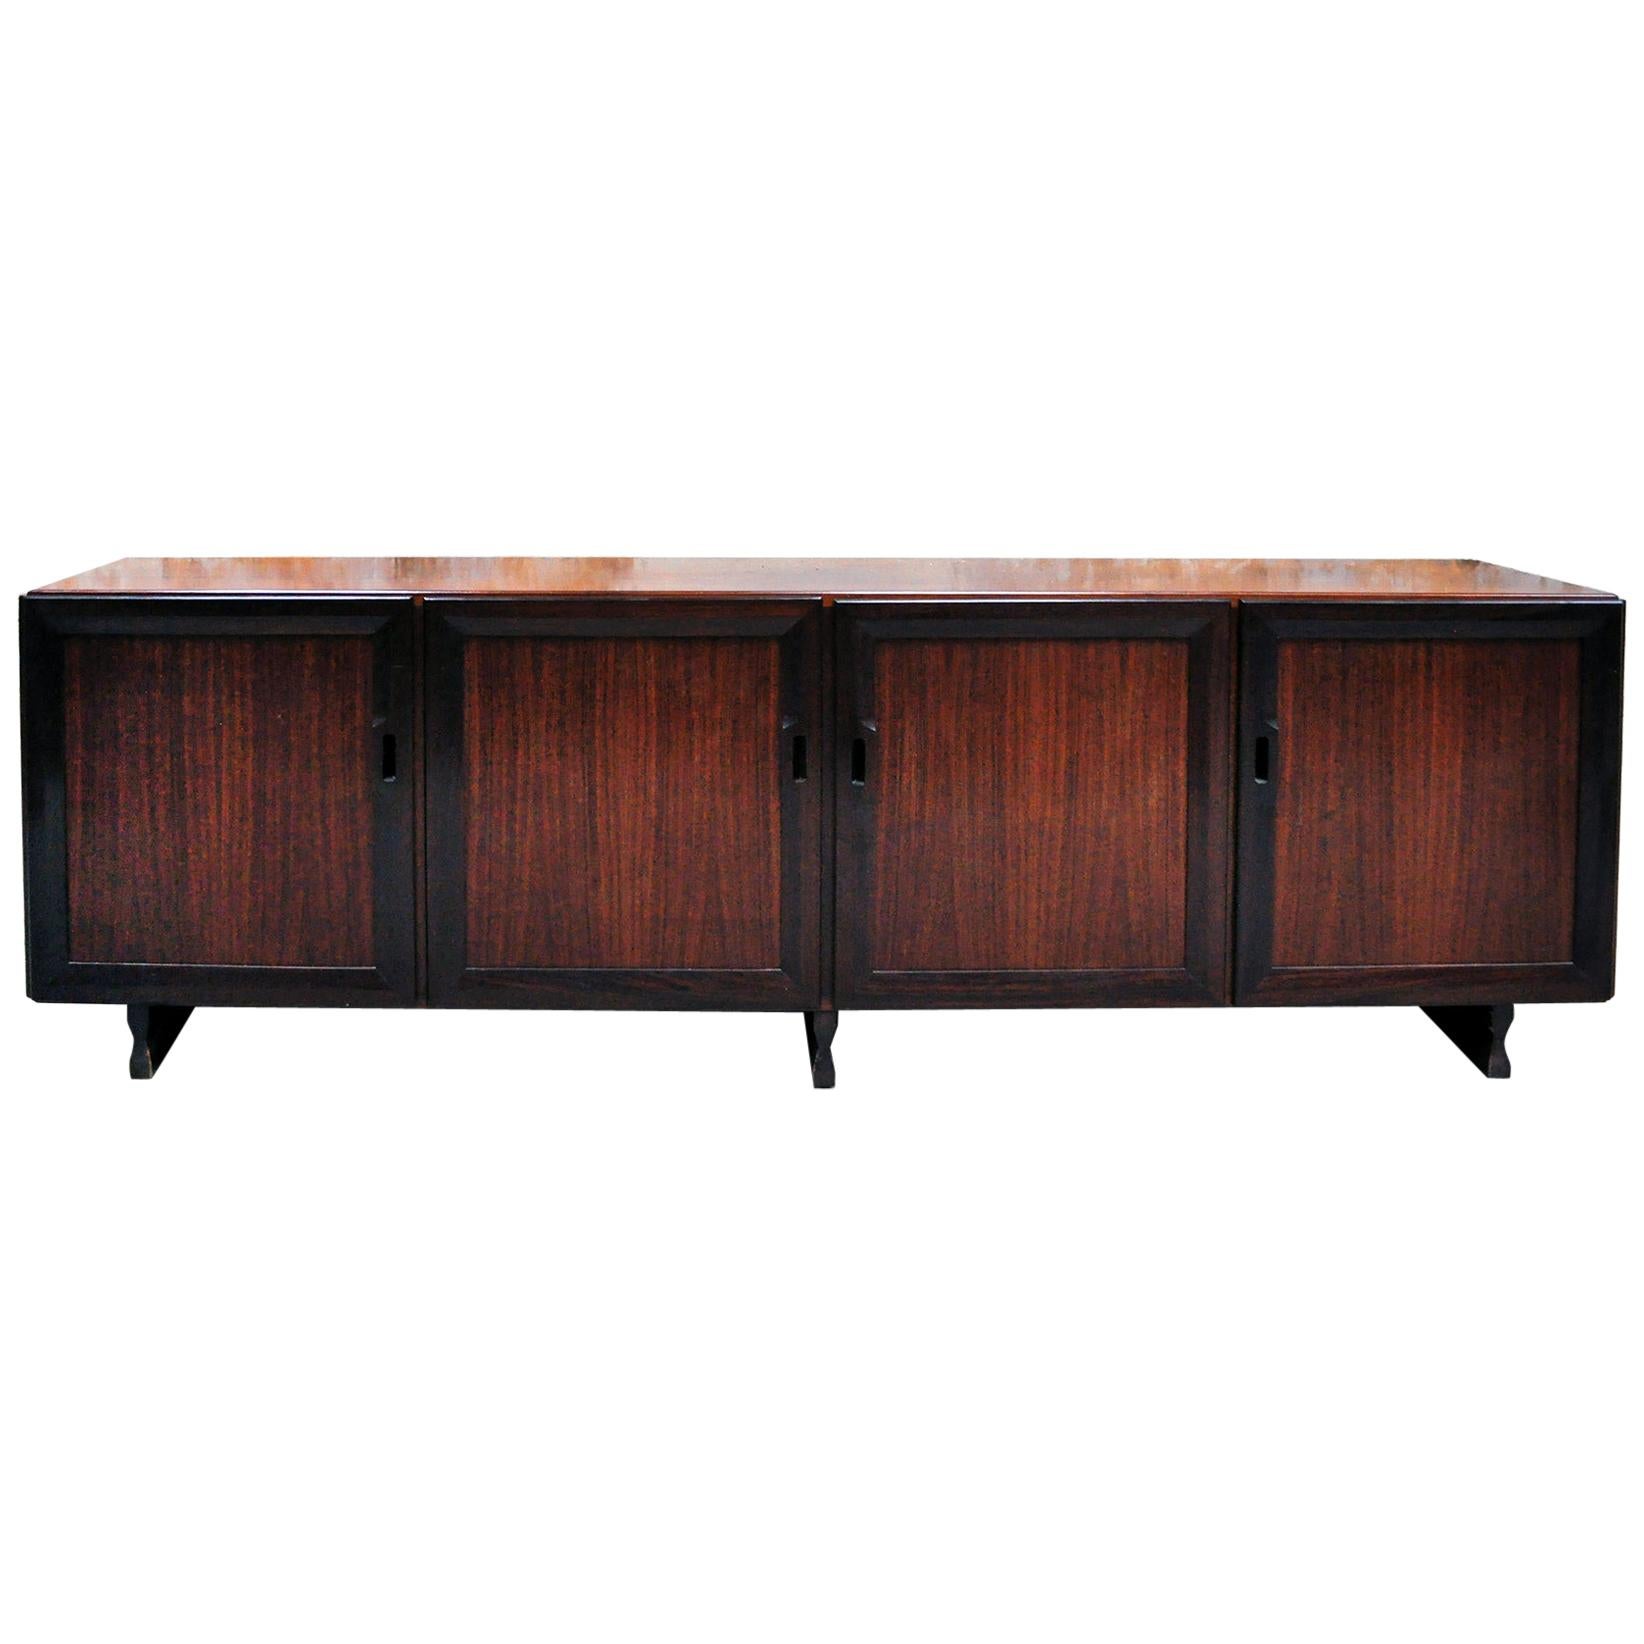 Rosewood sideboard MB15 by Franco Albini for Poggi, 1957 For Sale